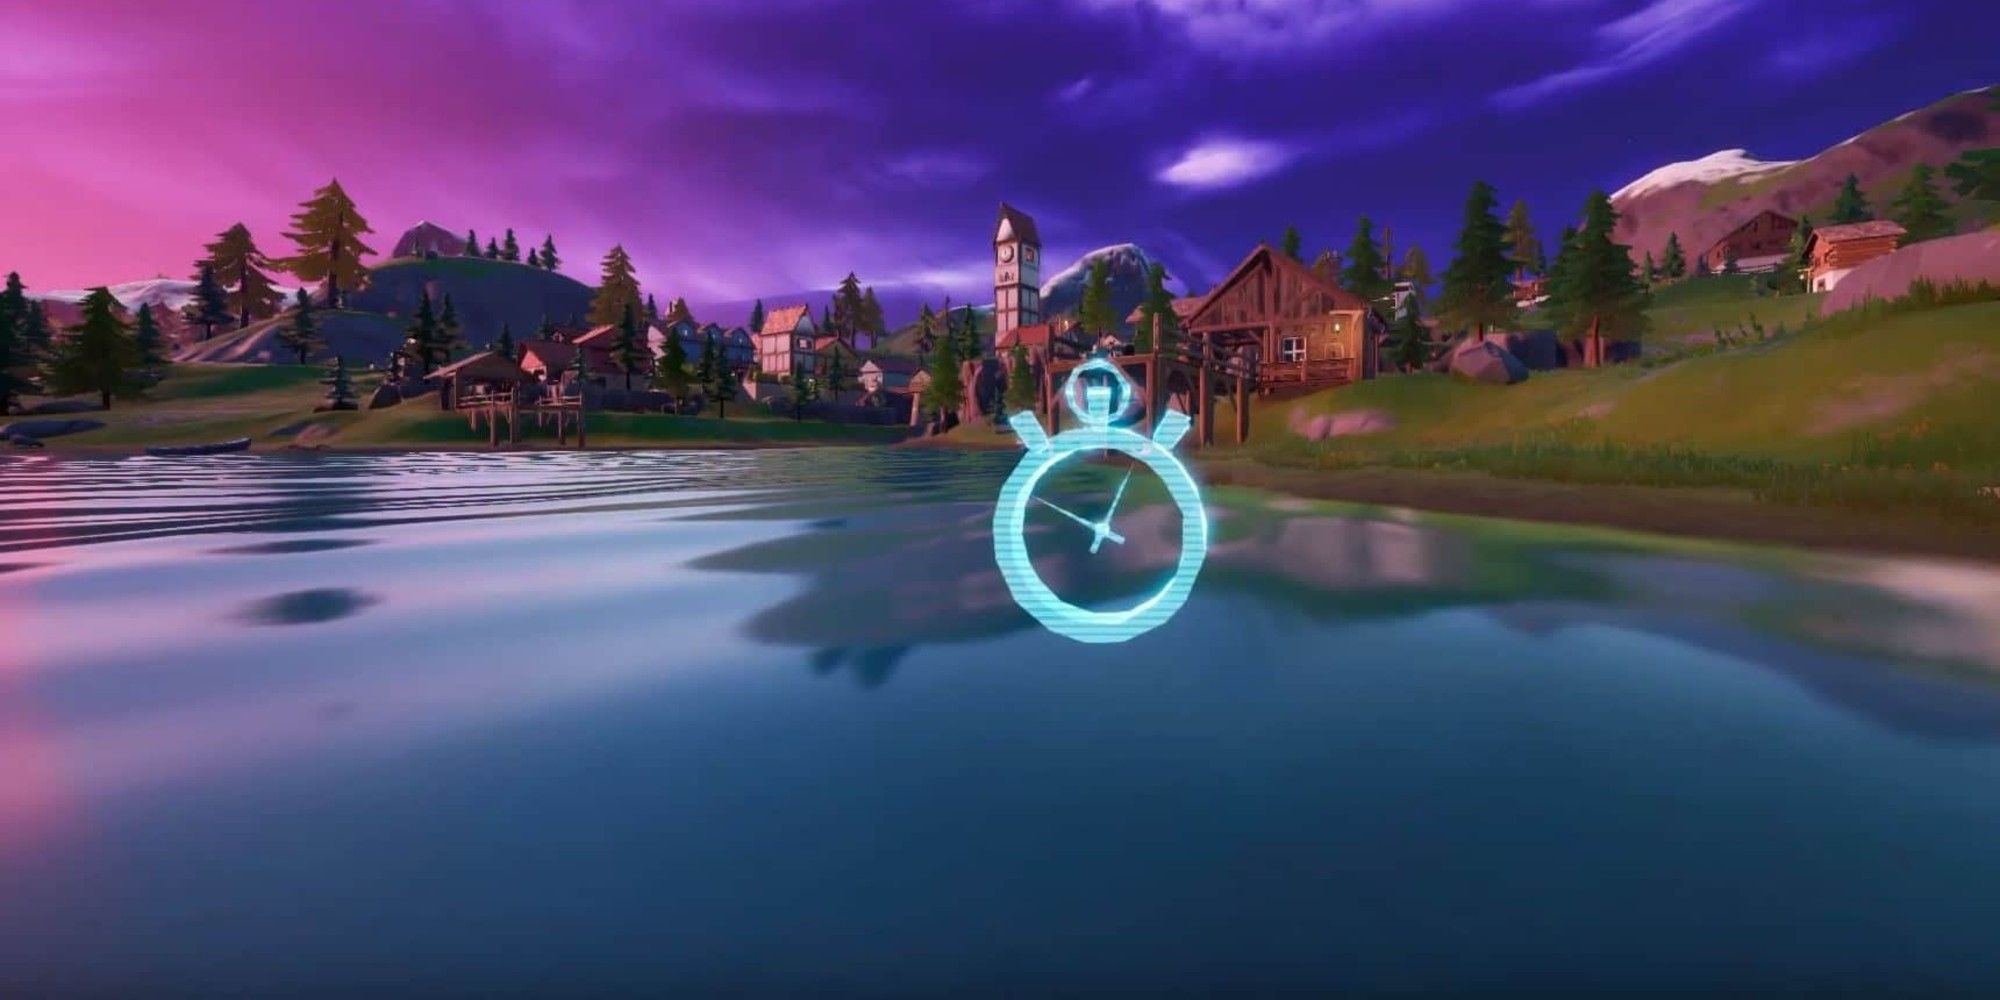 A Time Trial indicated by a glowing clock icon in Fortnite